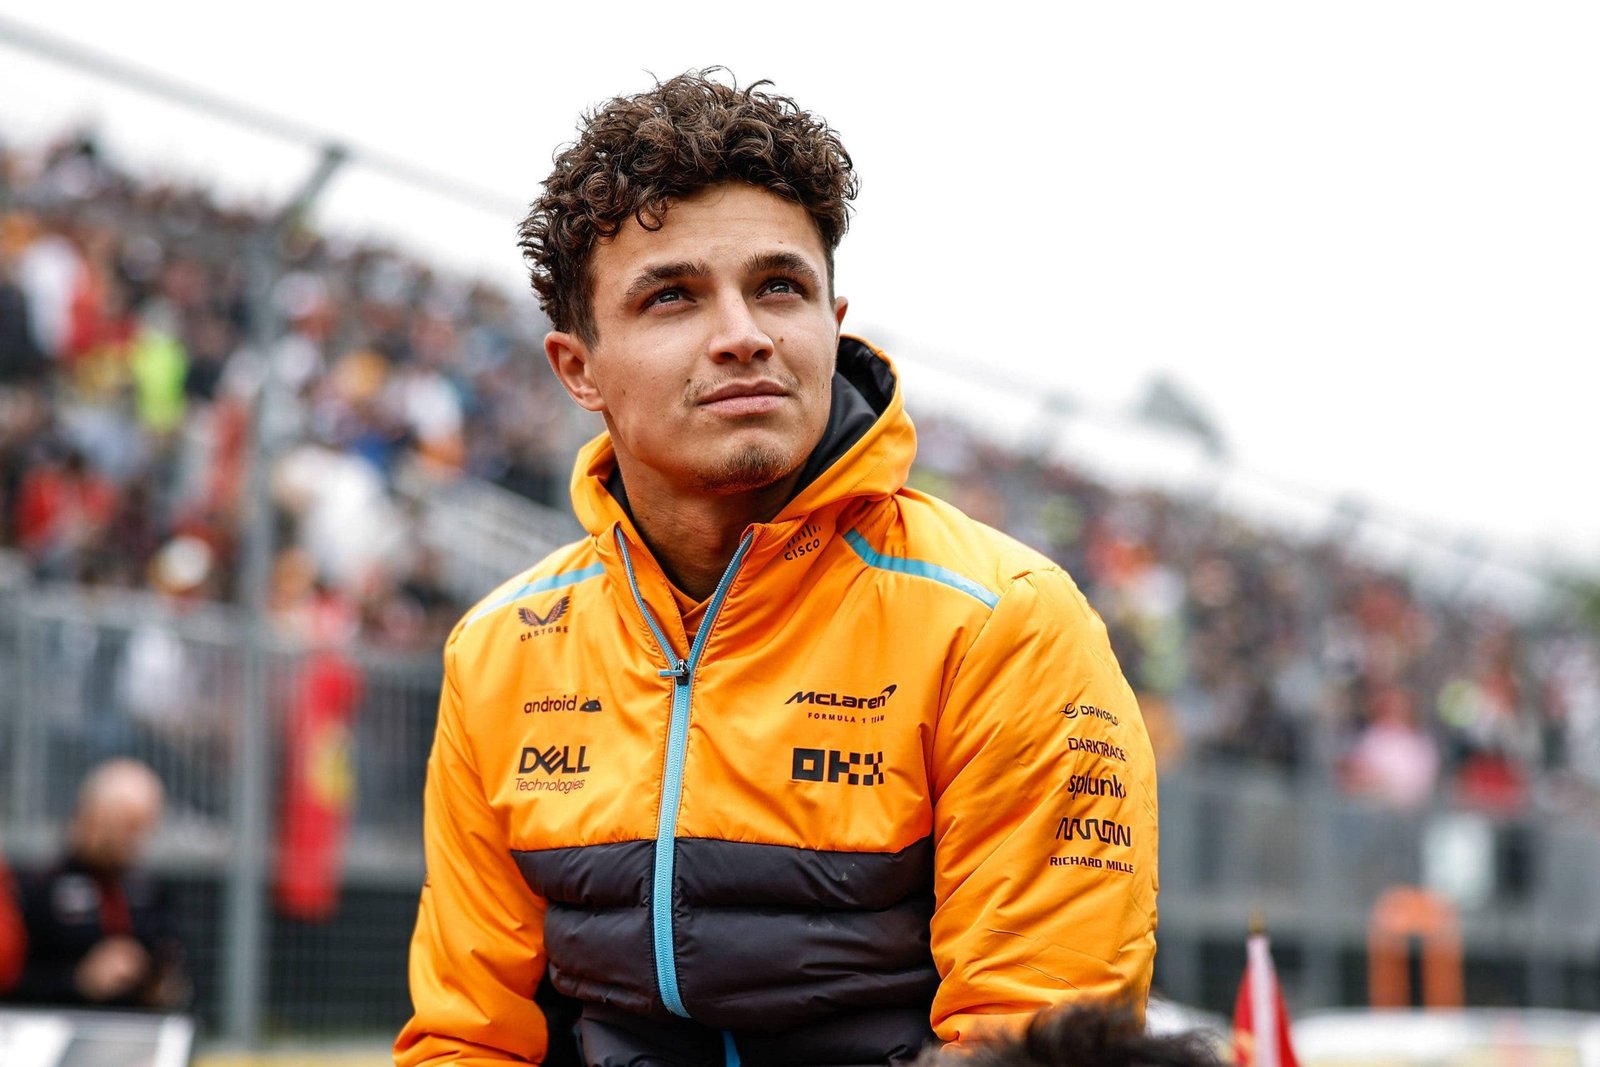 Breaking: F1 Sensation Lando Norris's Luxurious Marbella Mansion Raided, While He Dines with Social - lando norris 2 cordon press scaled 1 - Marbella News Crime -